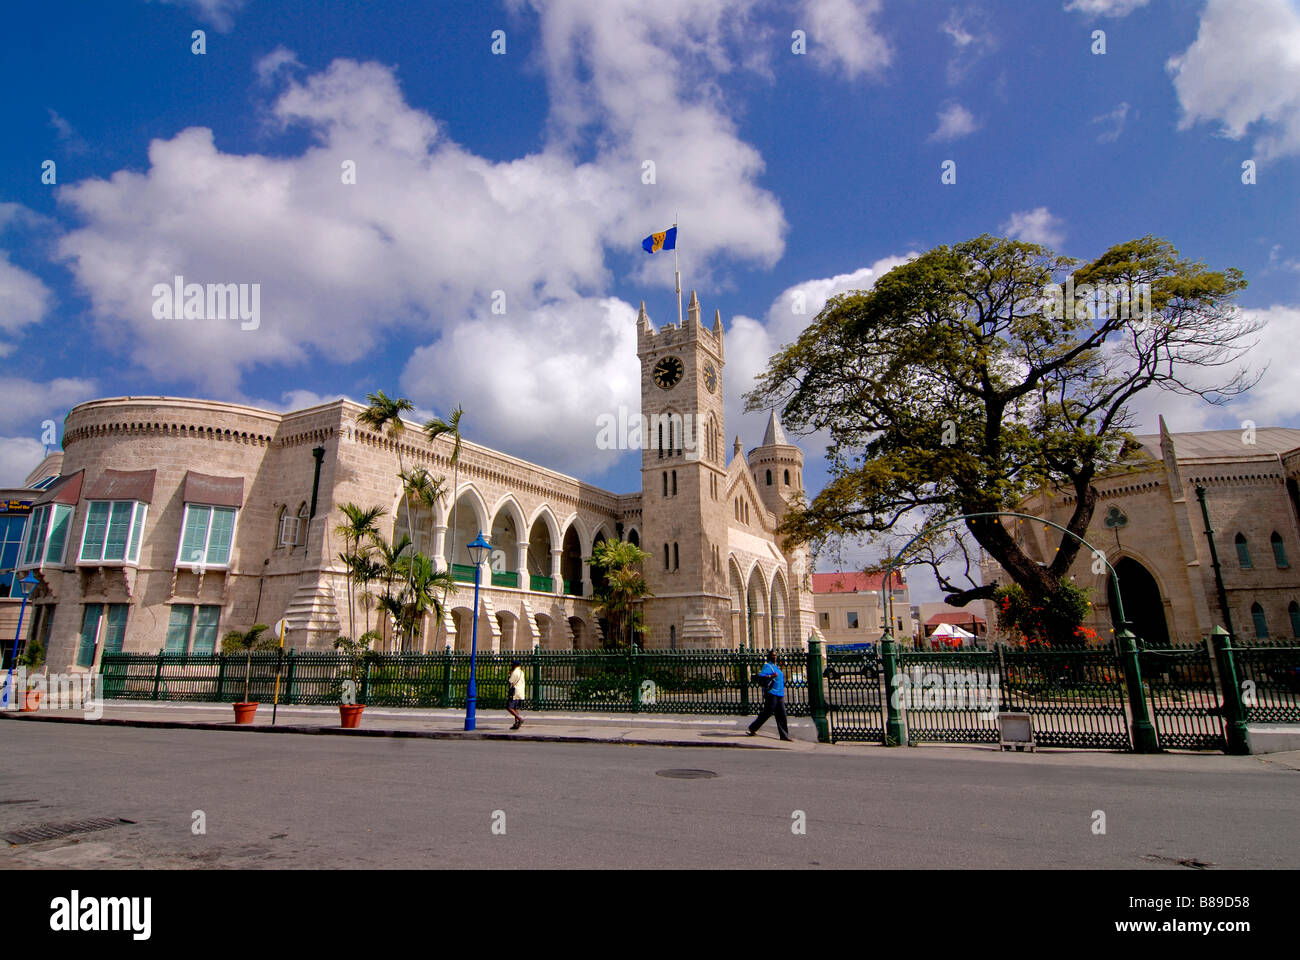 The goverment building standing behind a tree at Bridgetown Barbados Caribbean Stock Photo